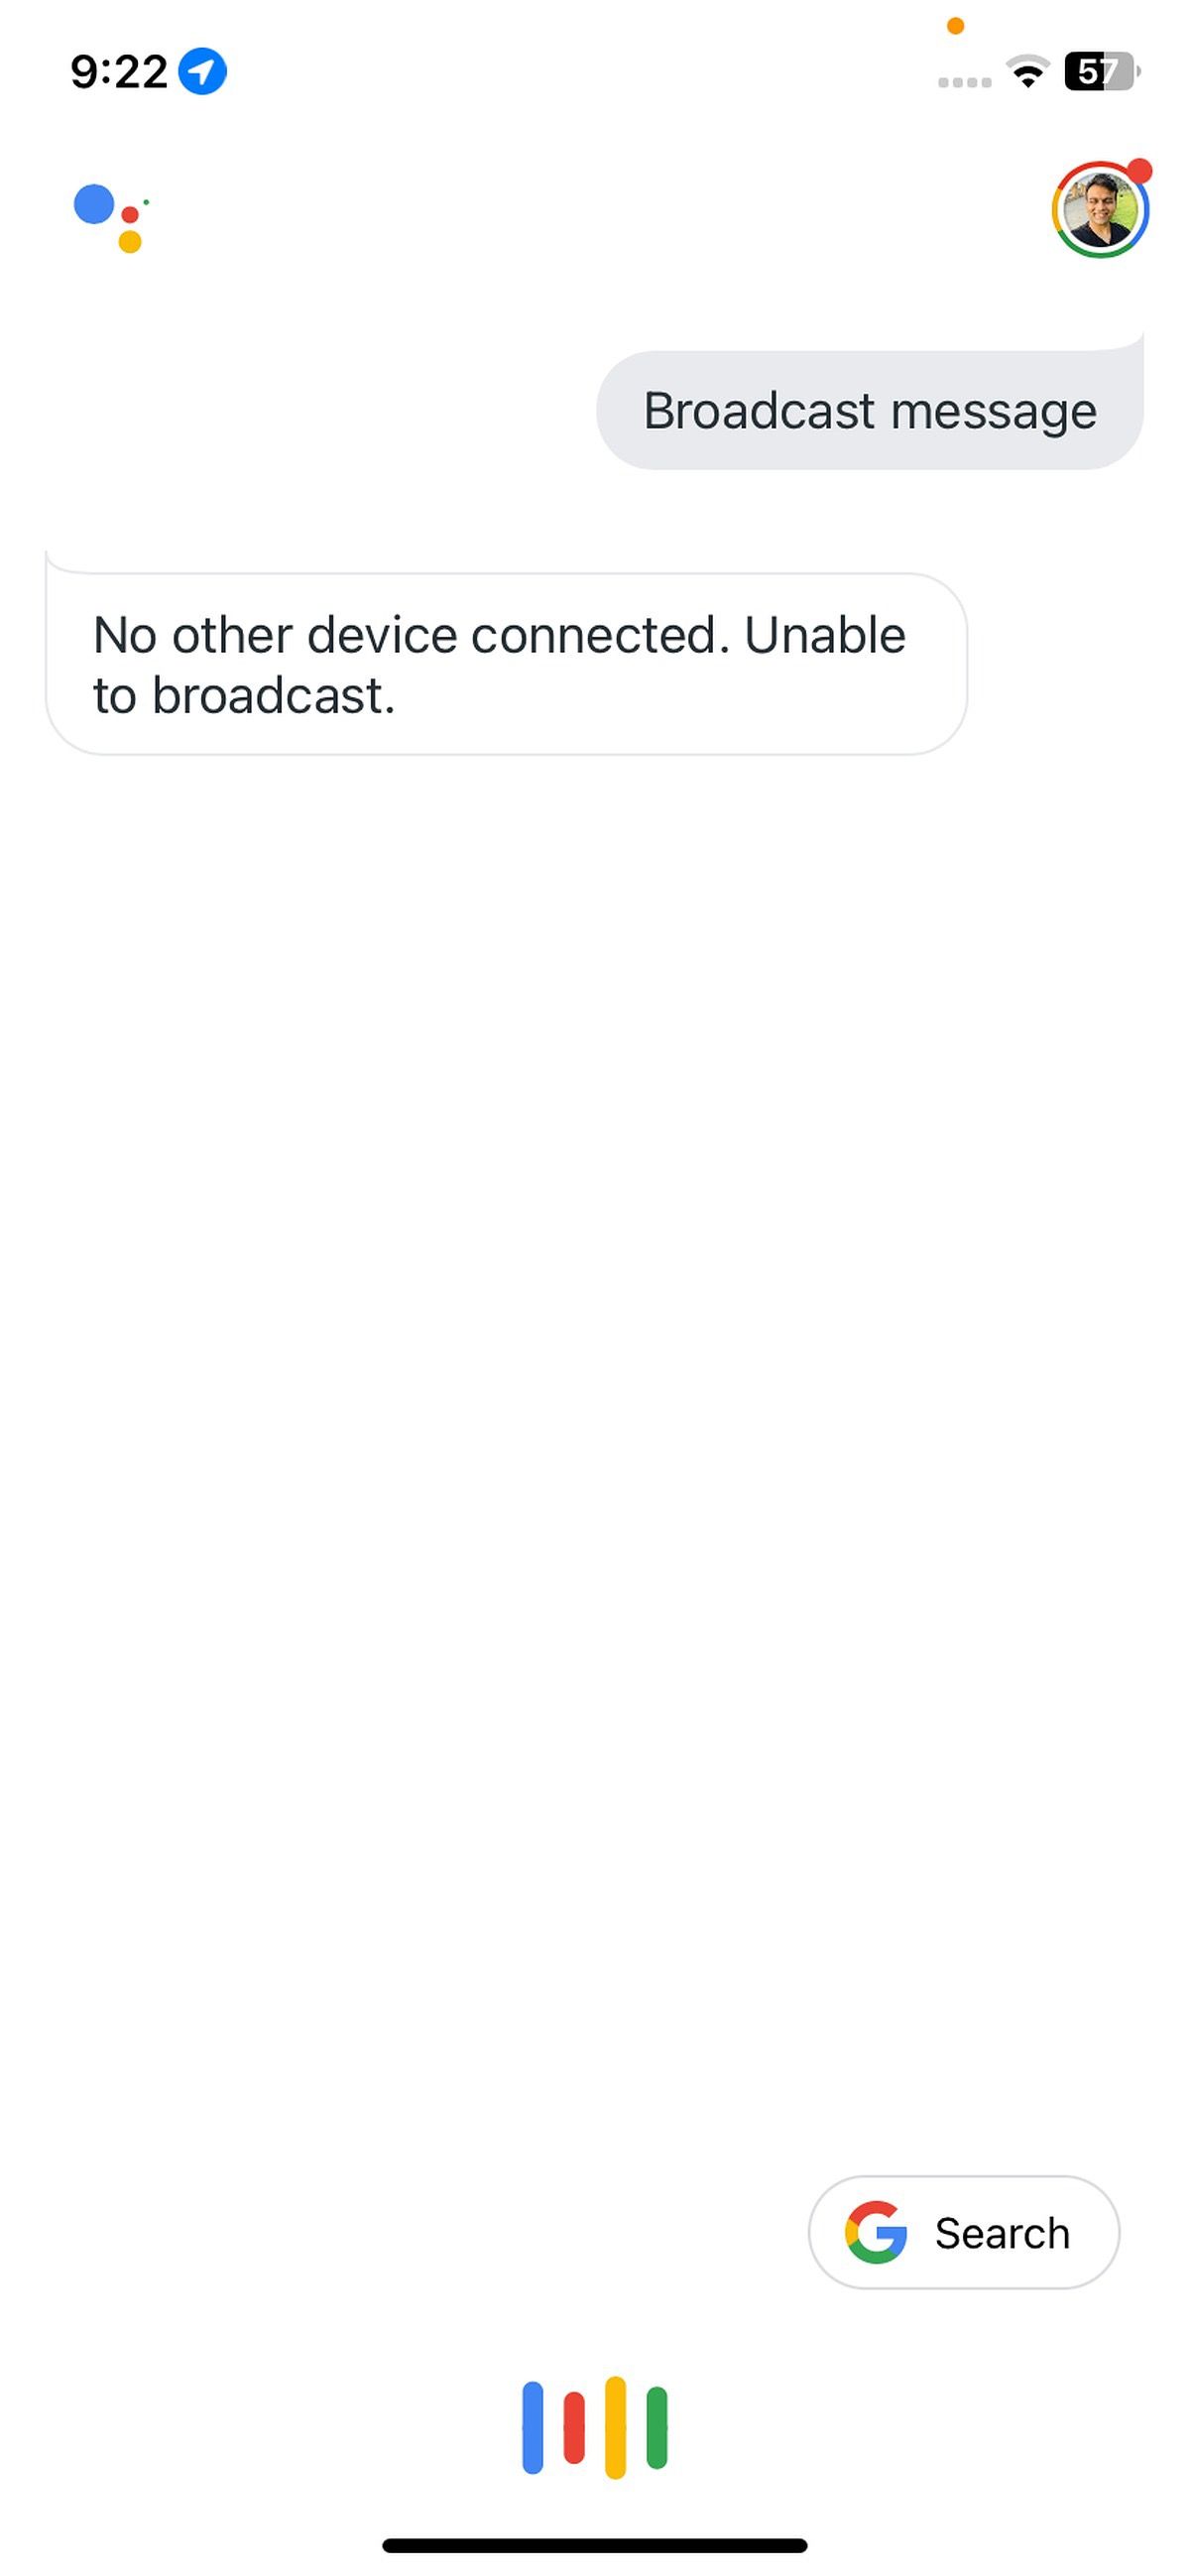 Broadcast a message to Google Assistant on iPhone